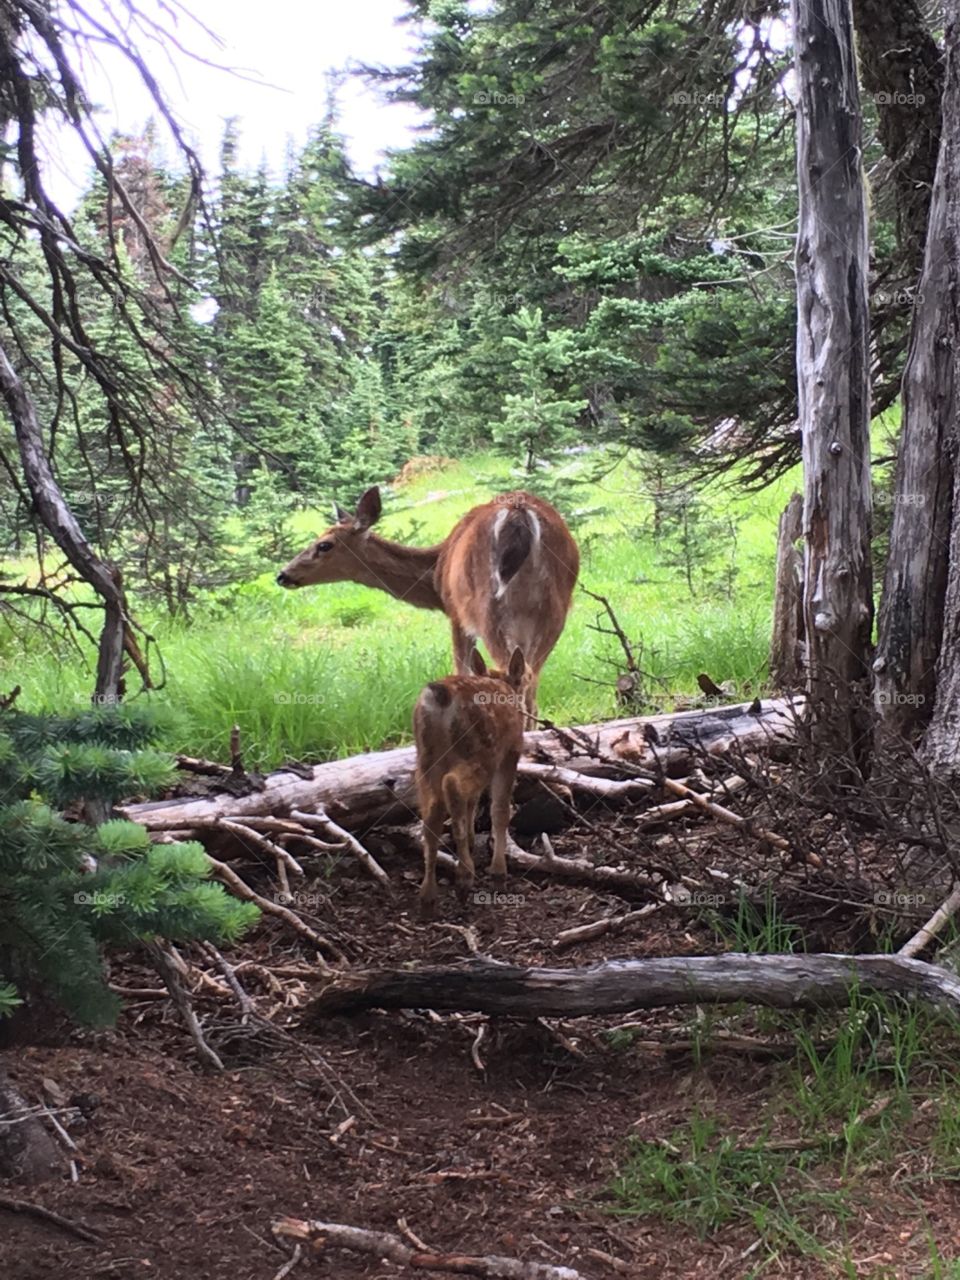 Mama deer leads her baby fawn through the woods

